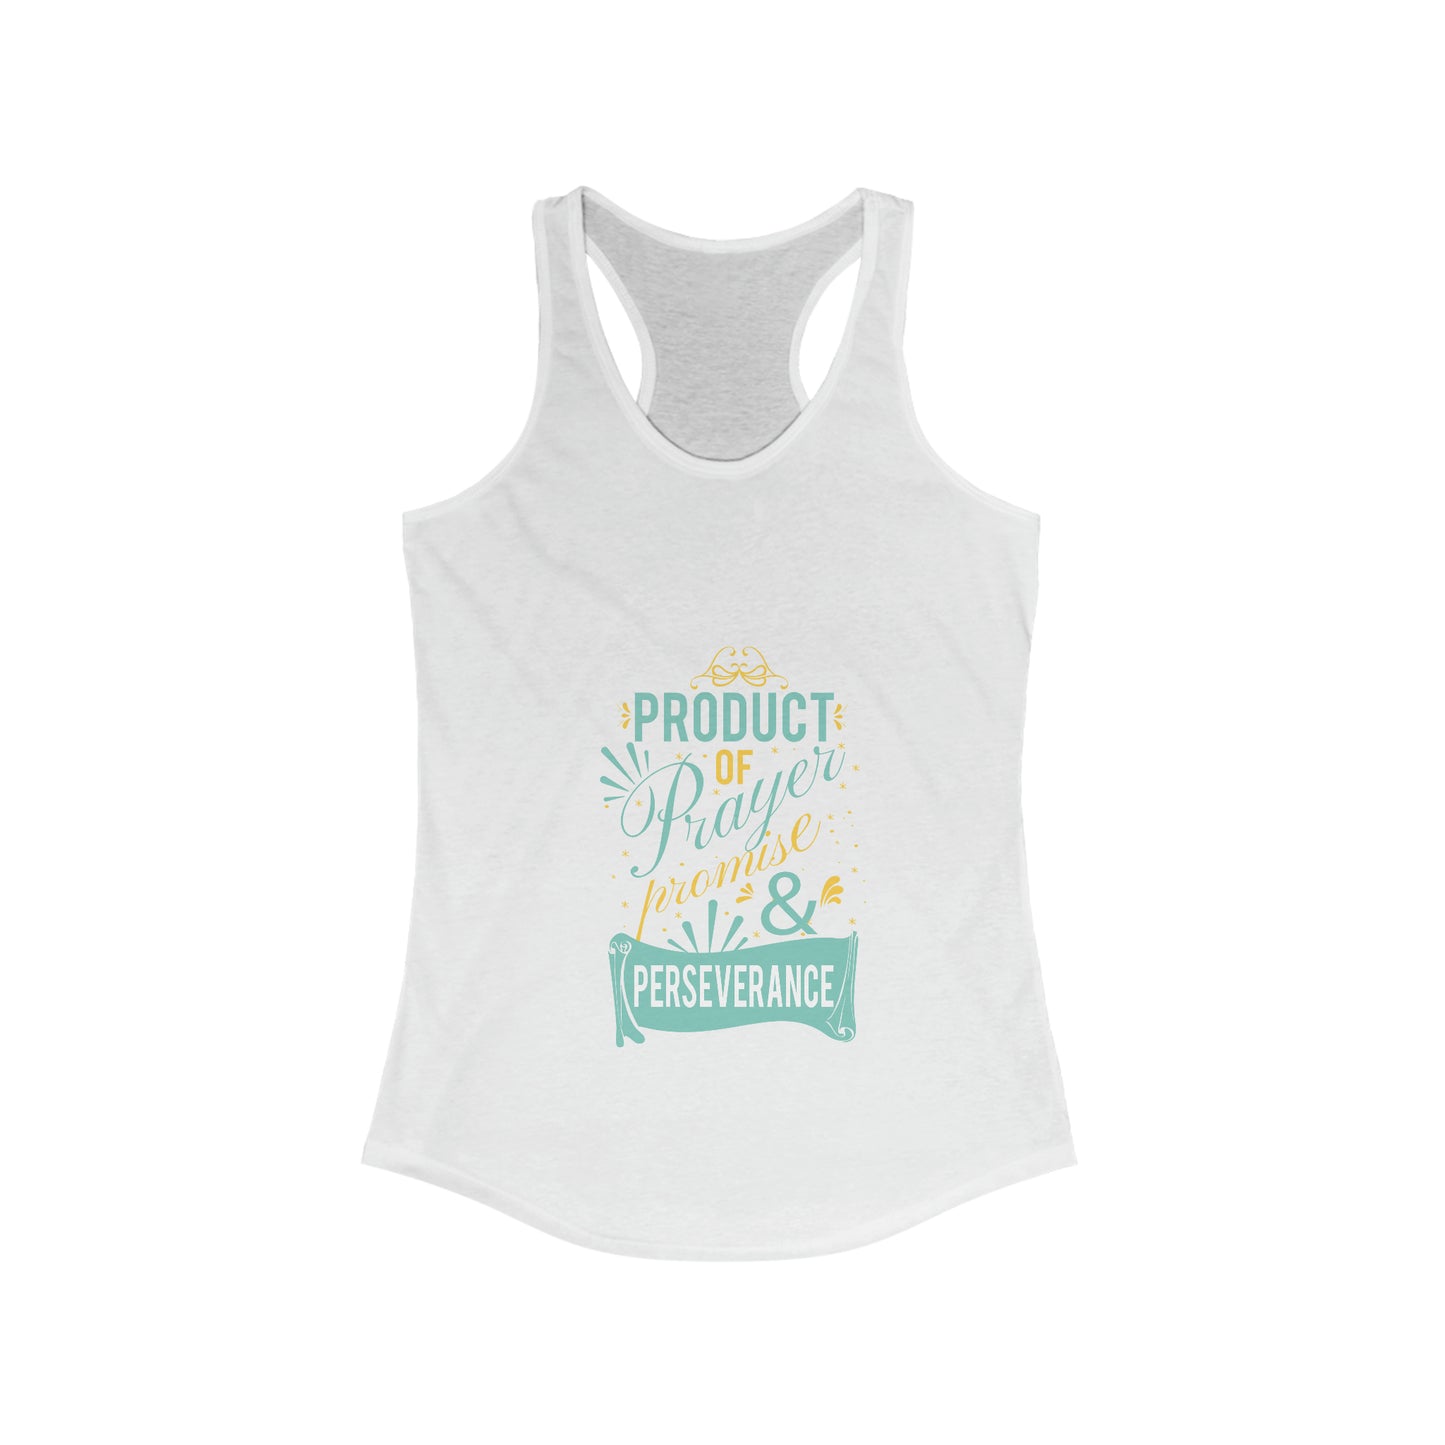 Product of Prayer, Promise, and Perseverance slim fit tank-top